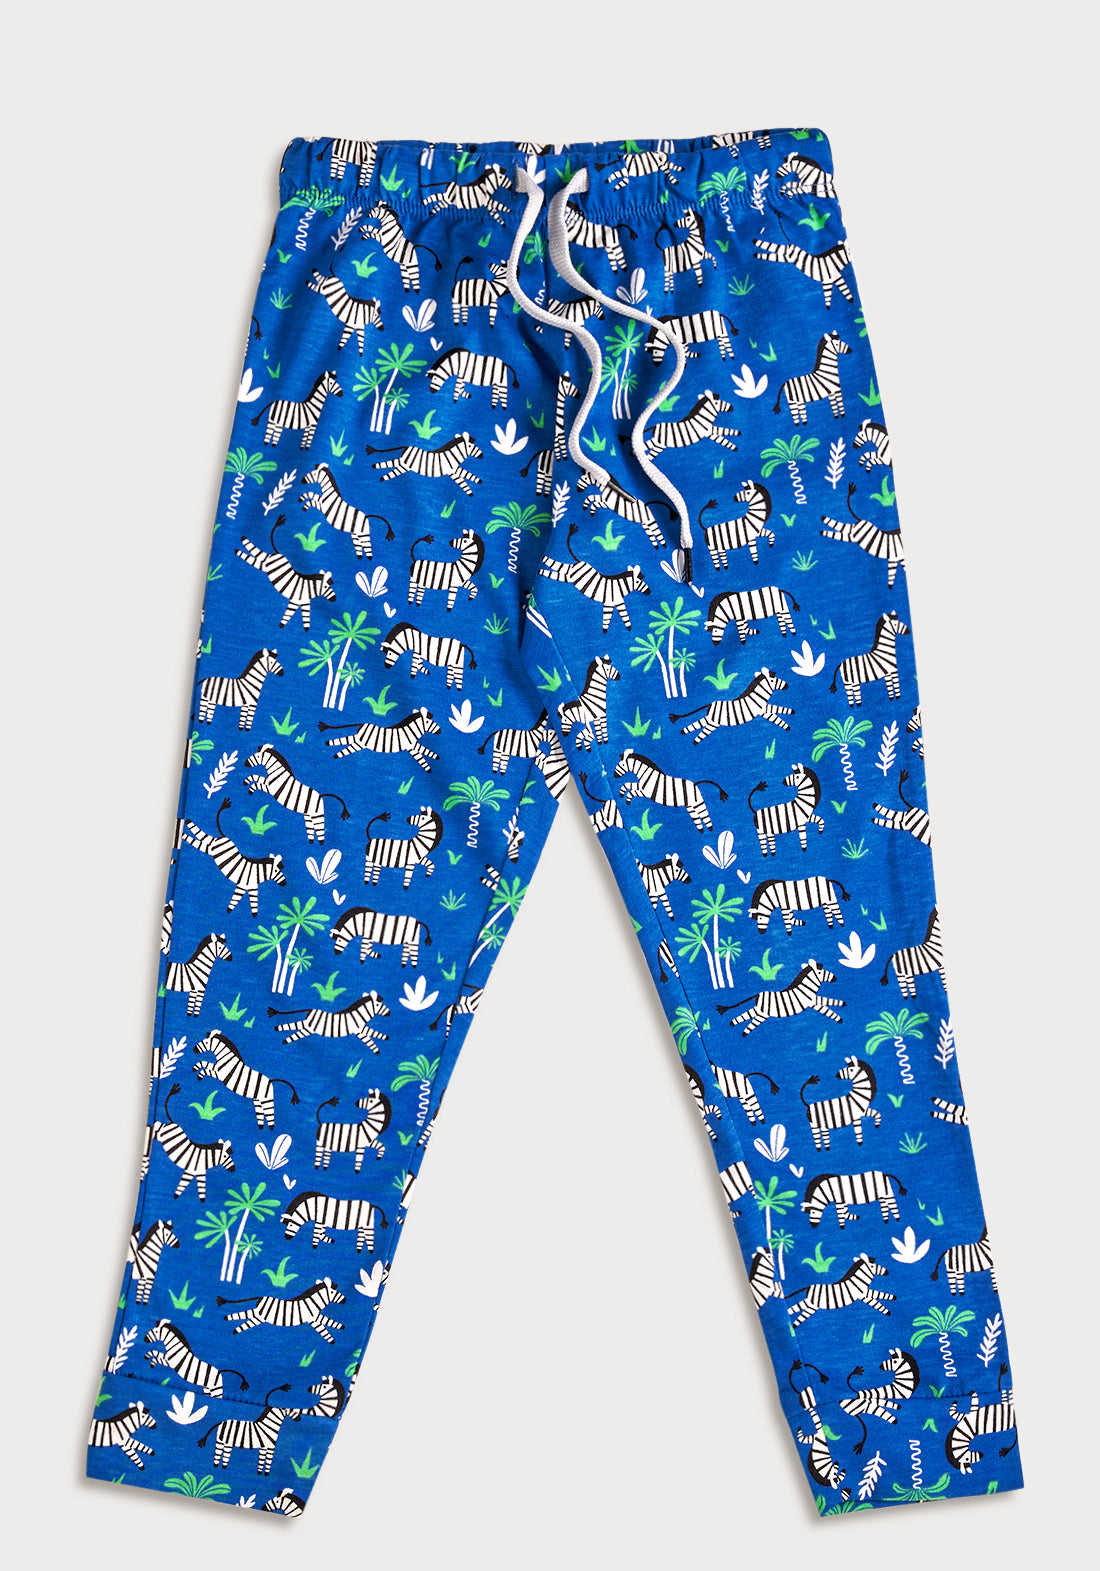 GREEN AND BLUE ZEBRA PRINT KNITTED PANTS